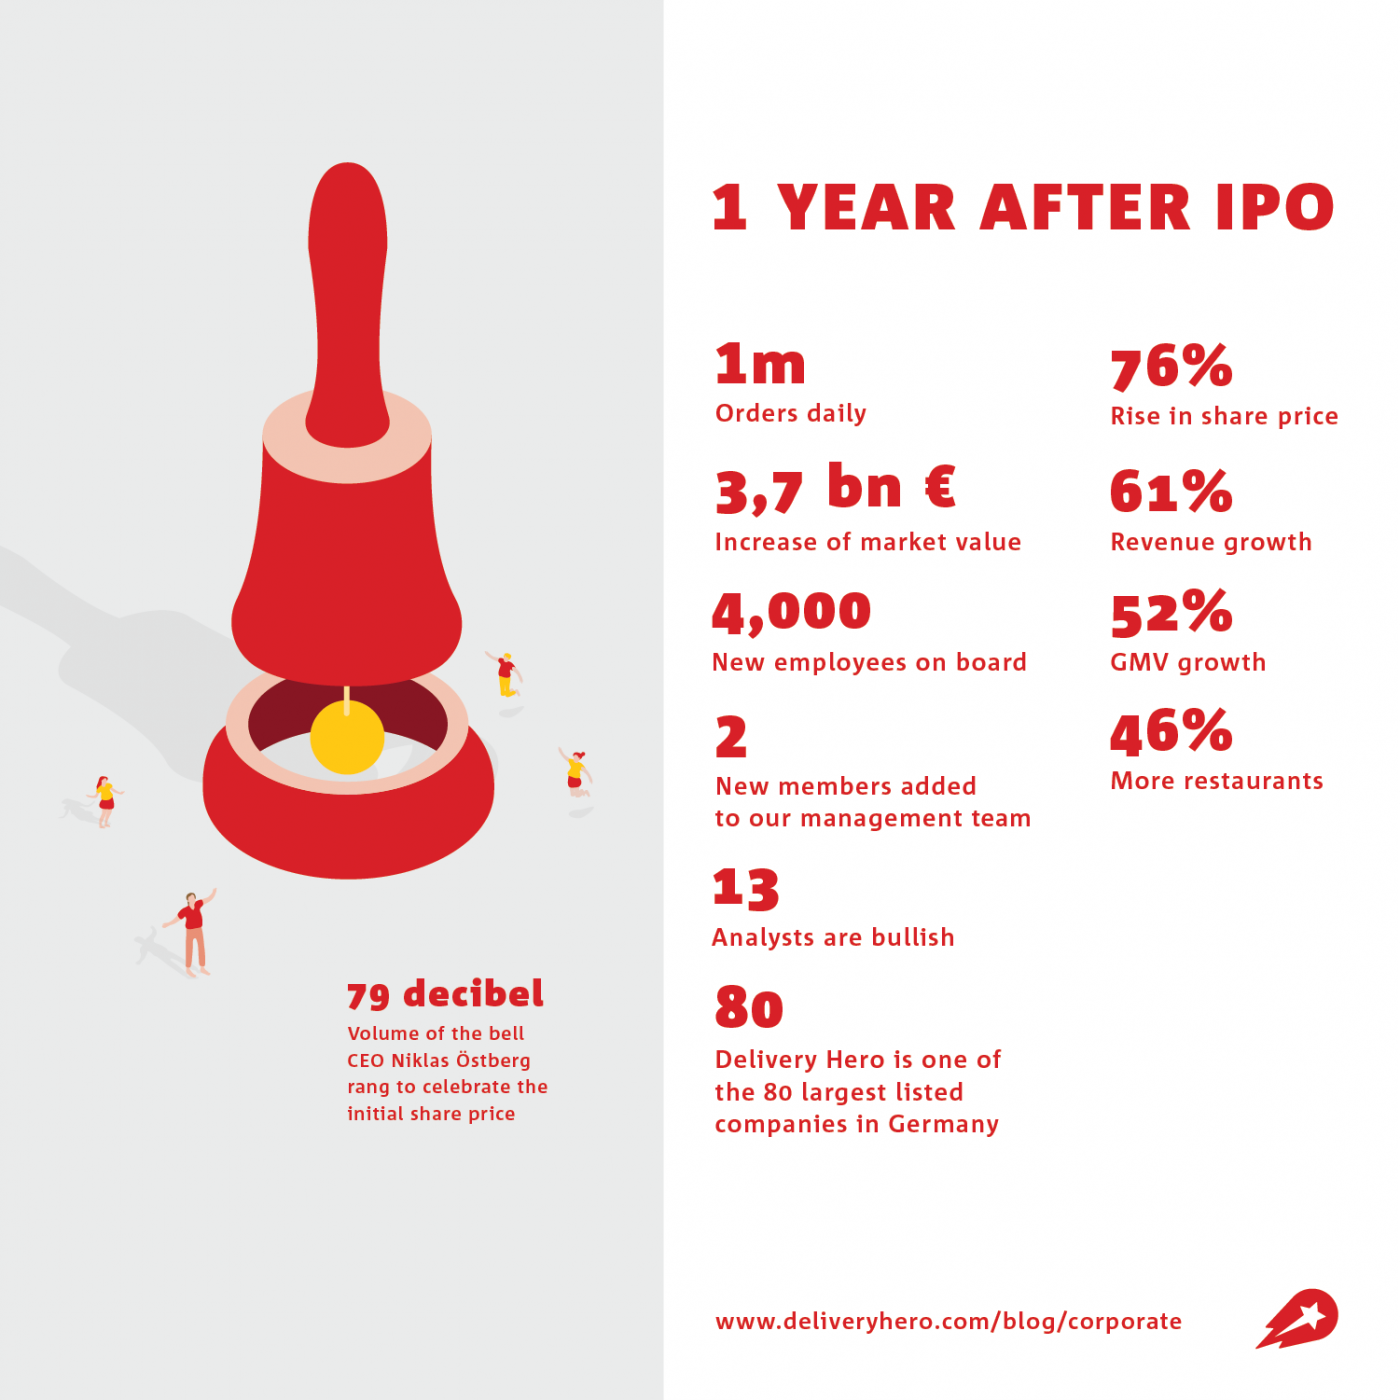 One year after IPO Delivery Hero